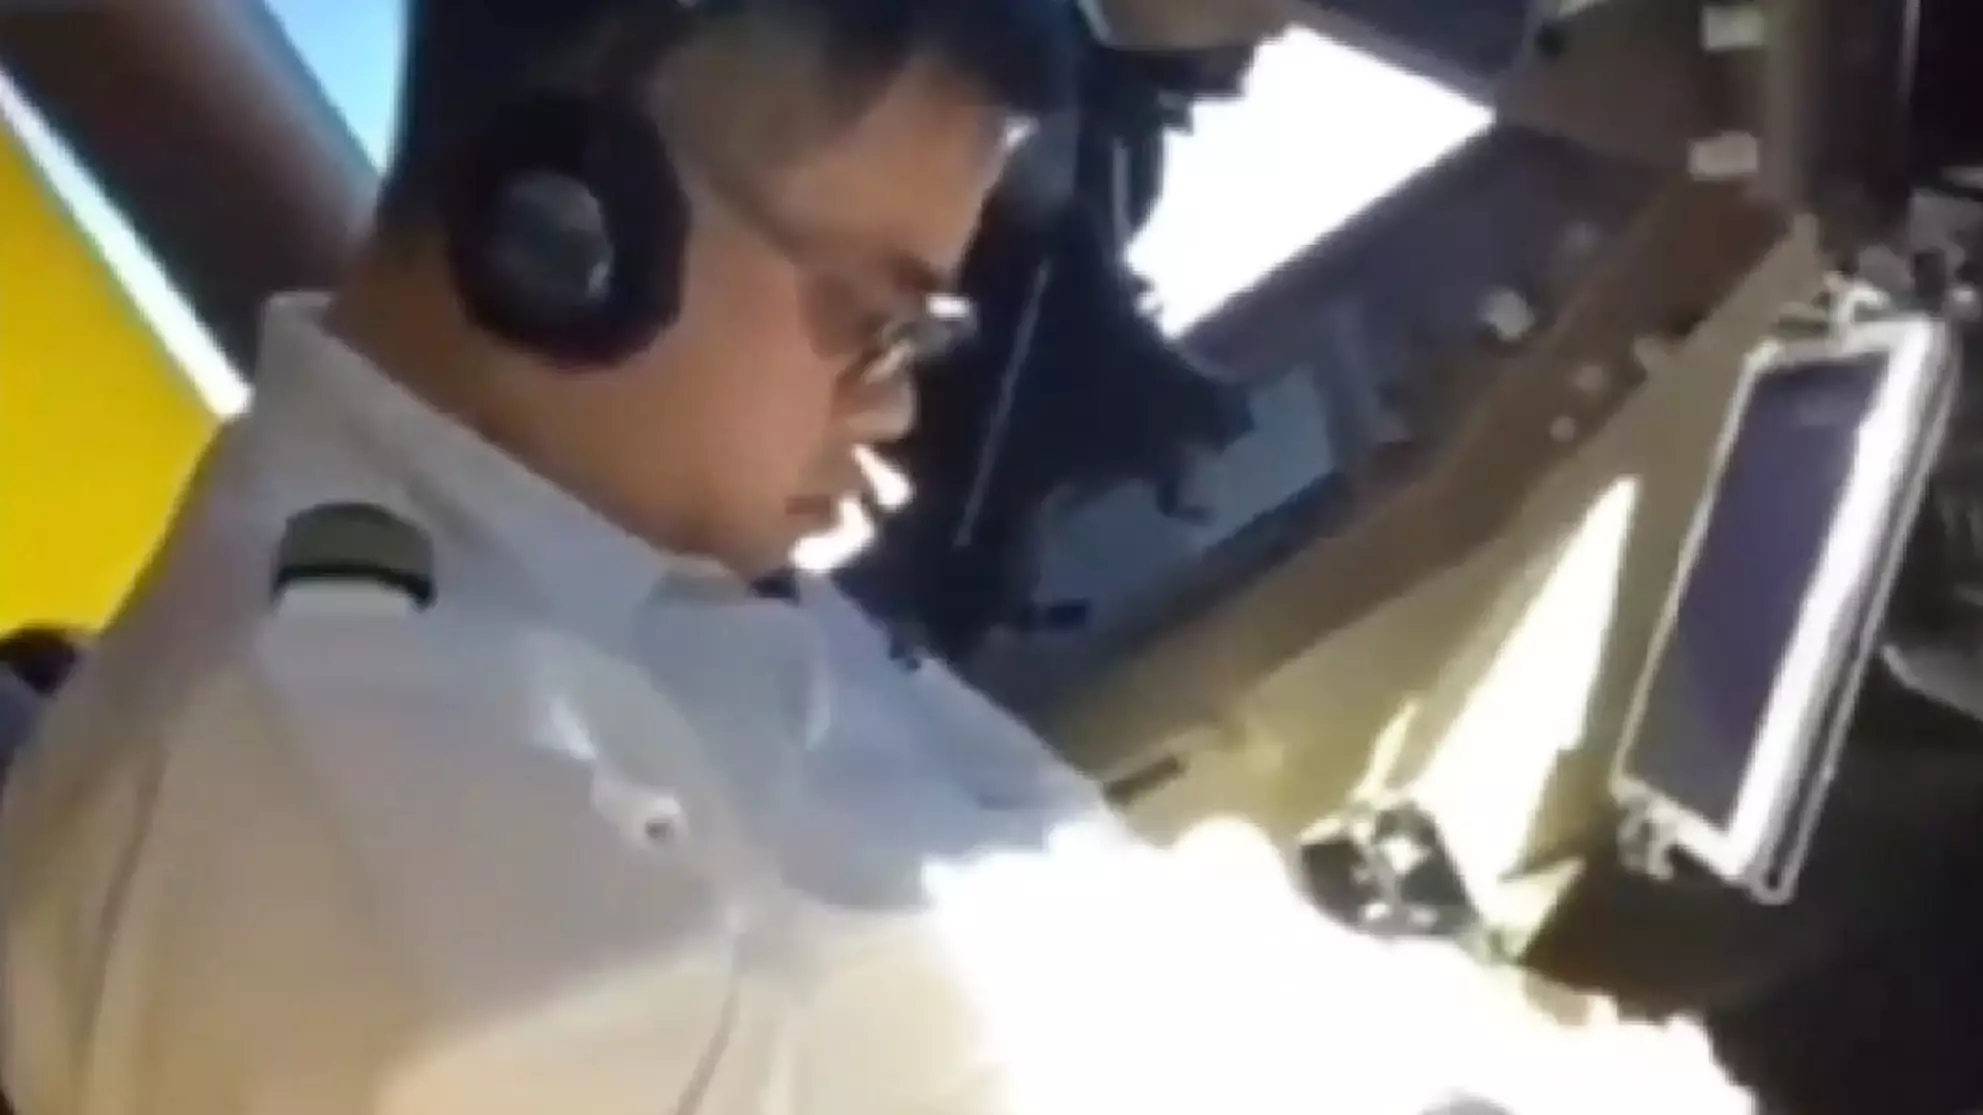 Chinese Pilot Filmed Asleep At The Controls Of A Passenger Jet